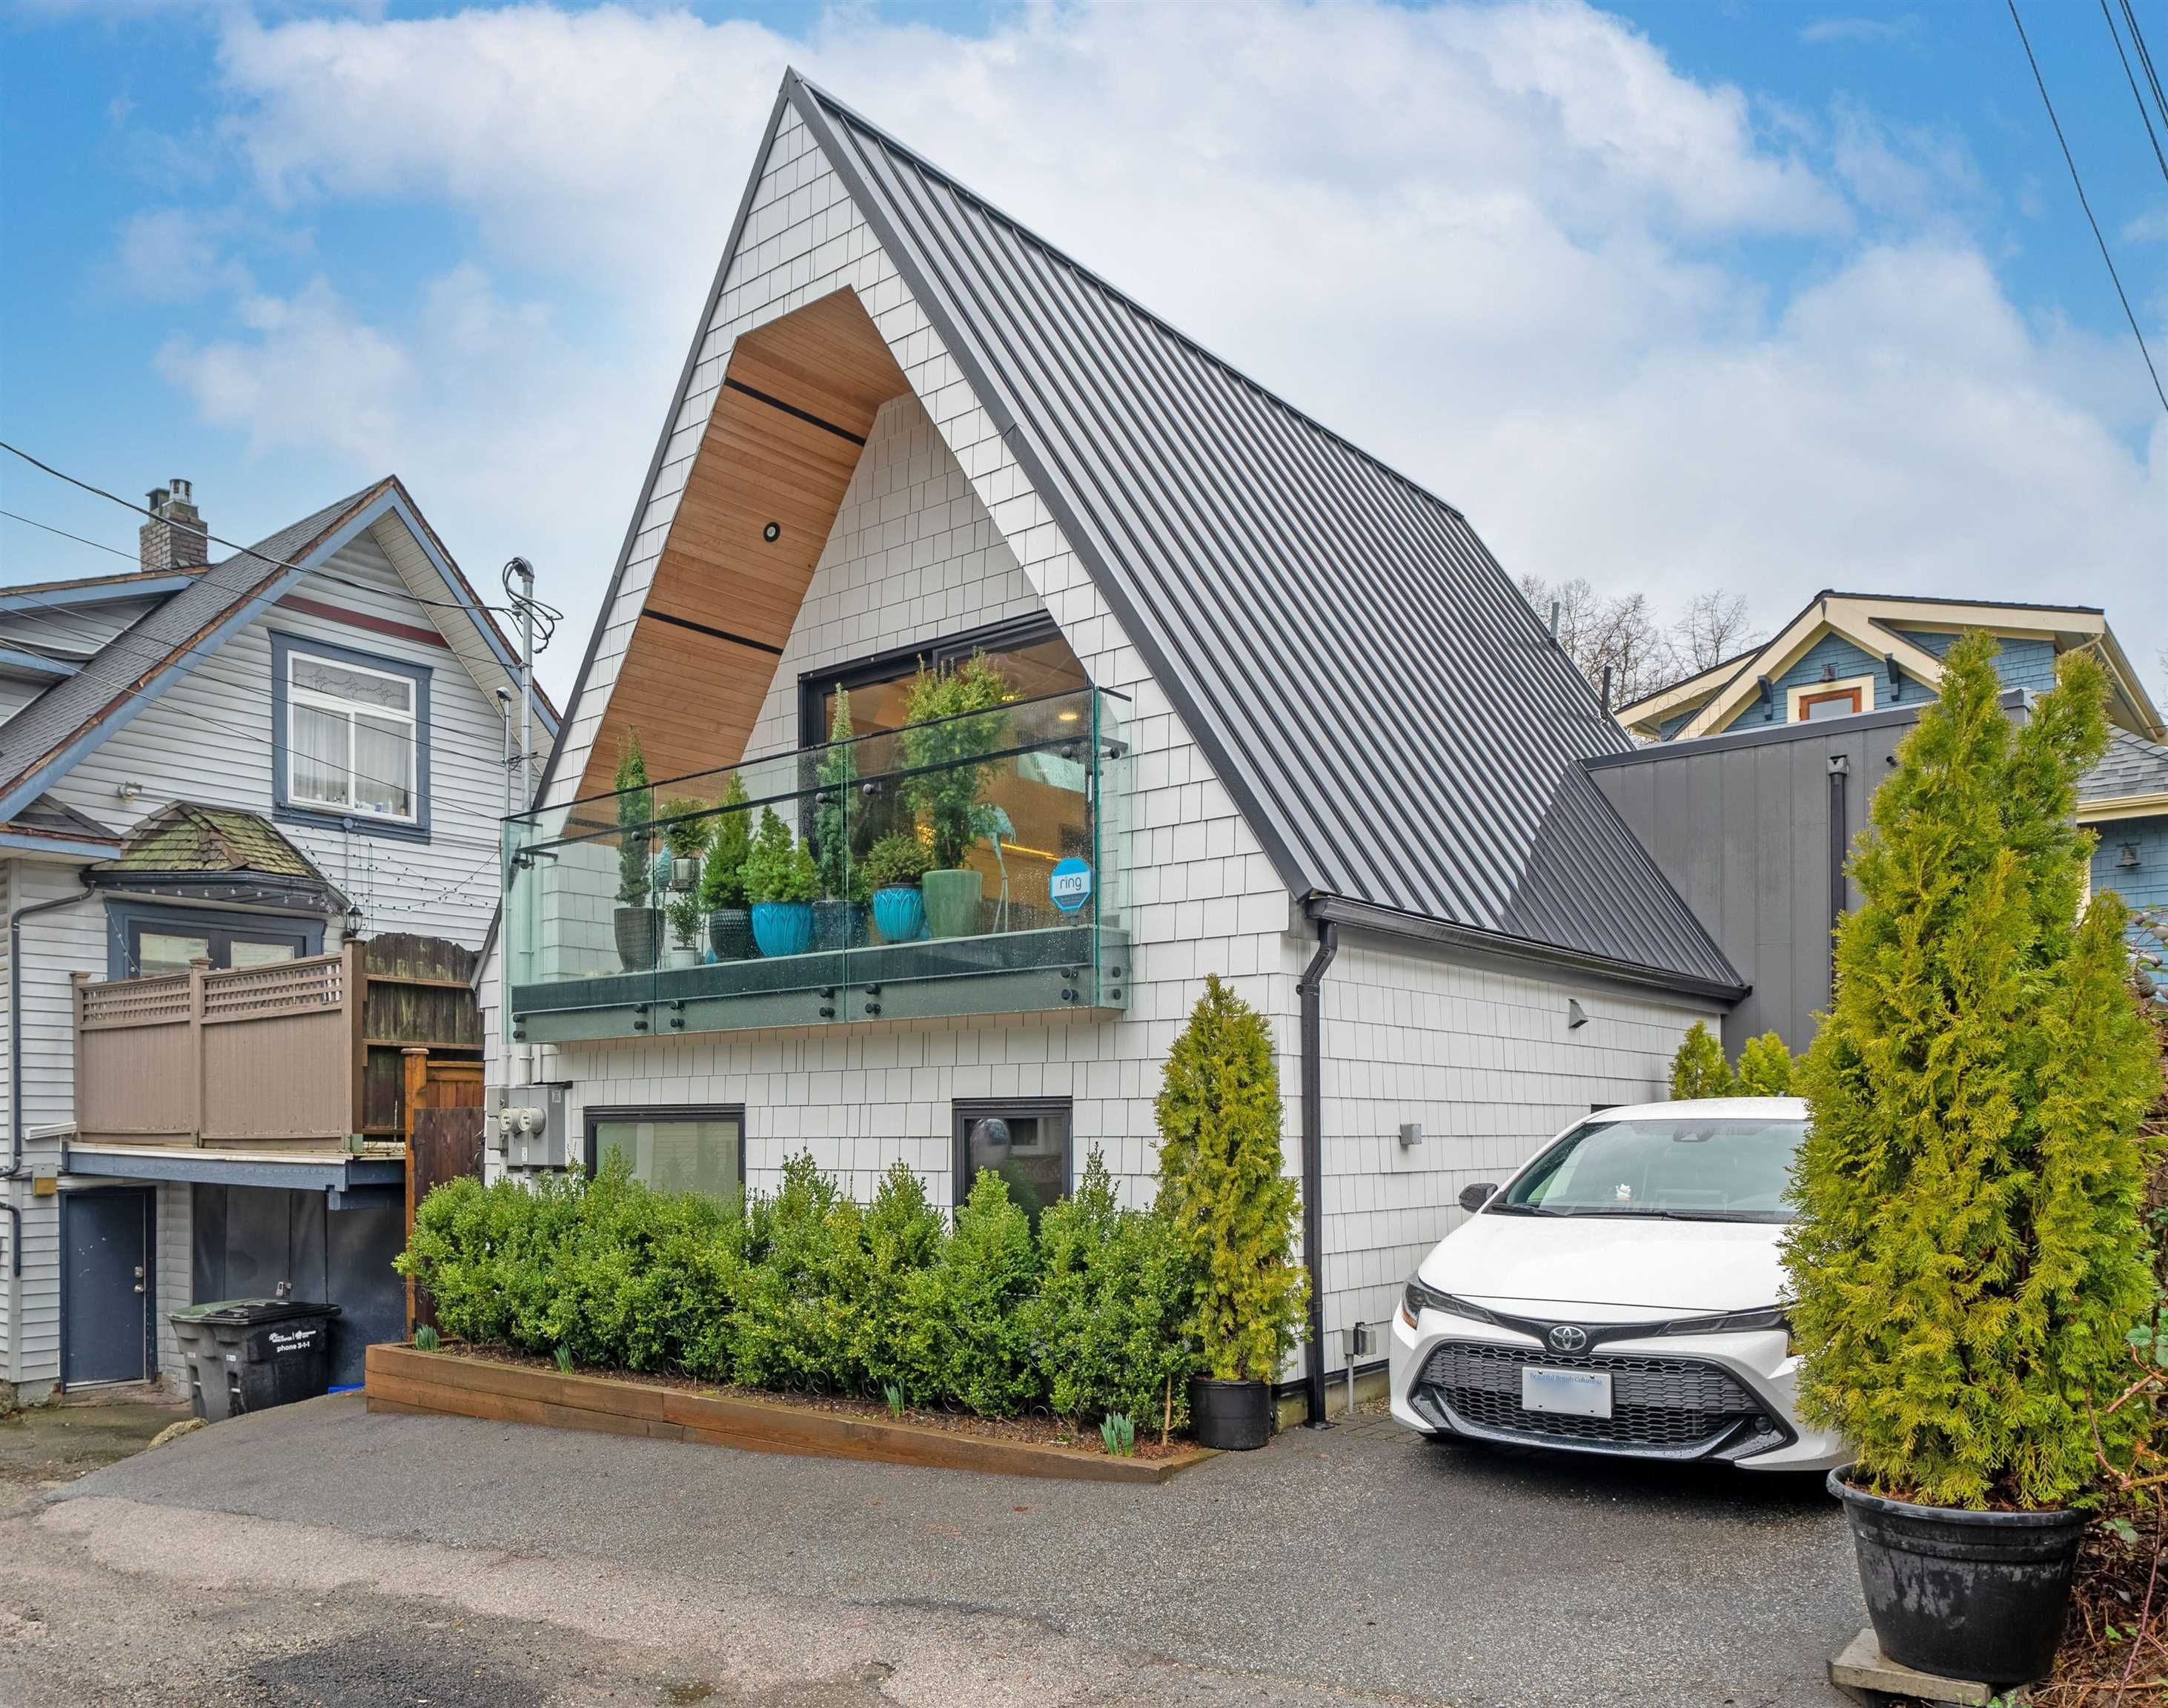 New property listed in Grandview Woodland, Vancouver East